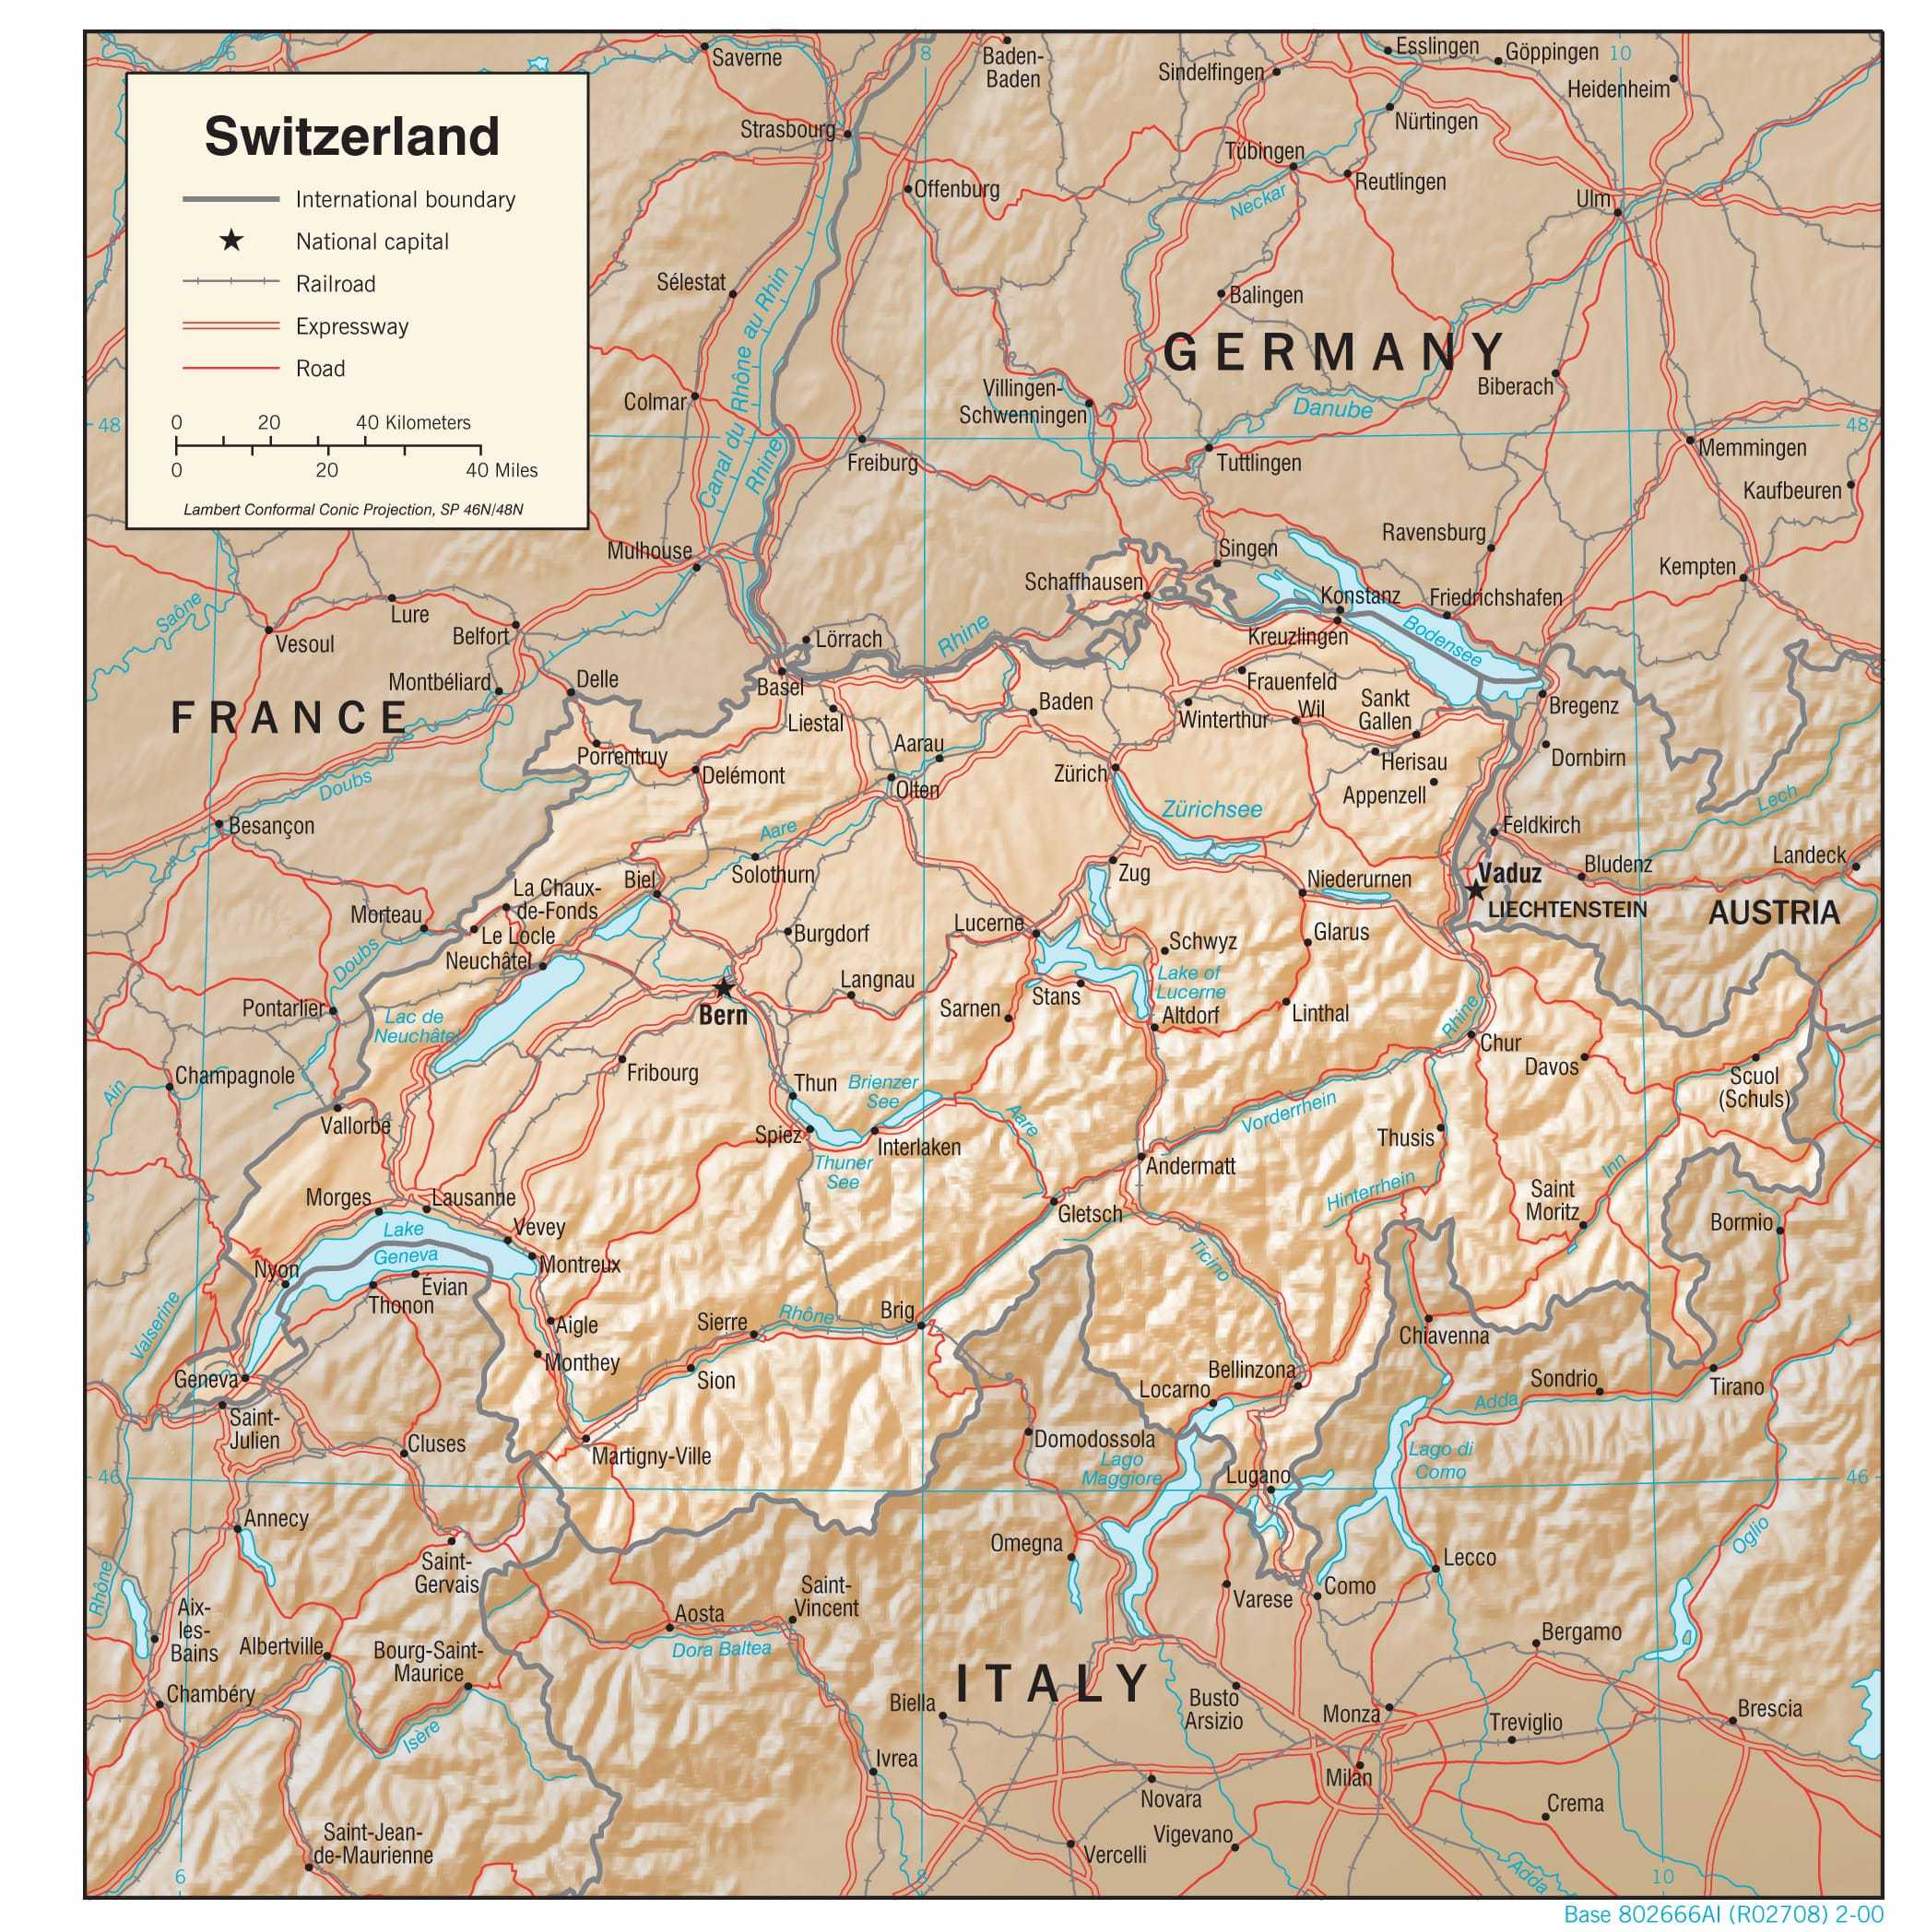 Physiographical map of Switzerland.